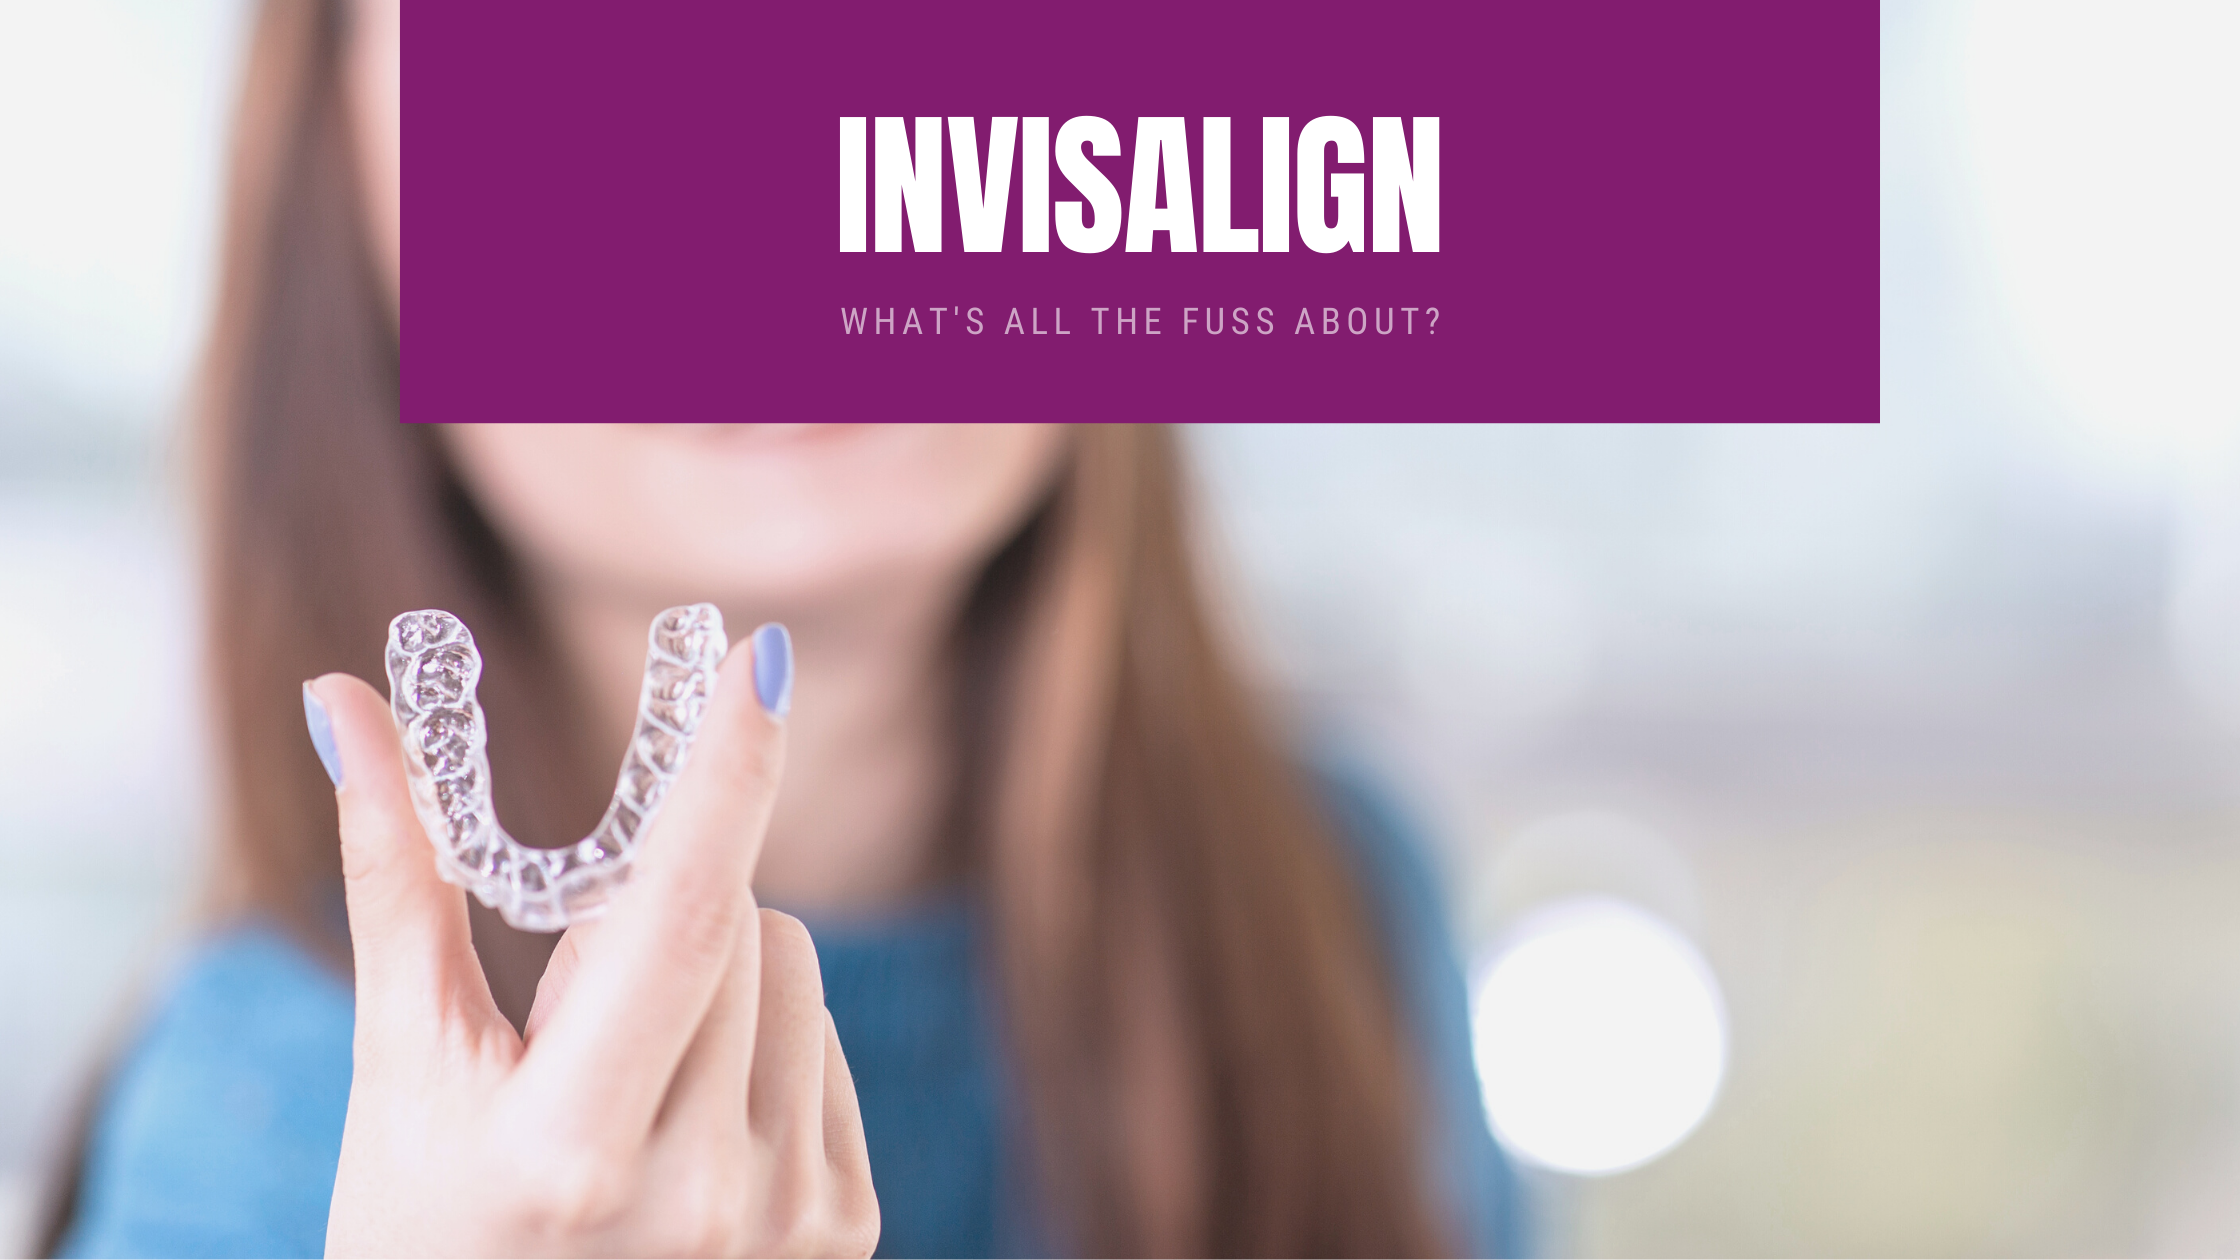 Invisalign Shropshire, what's all the fuss about?